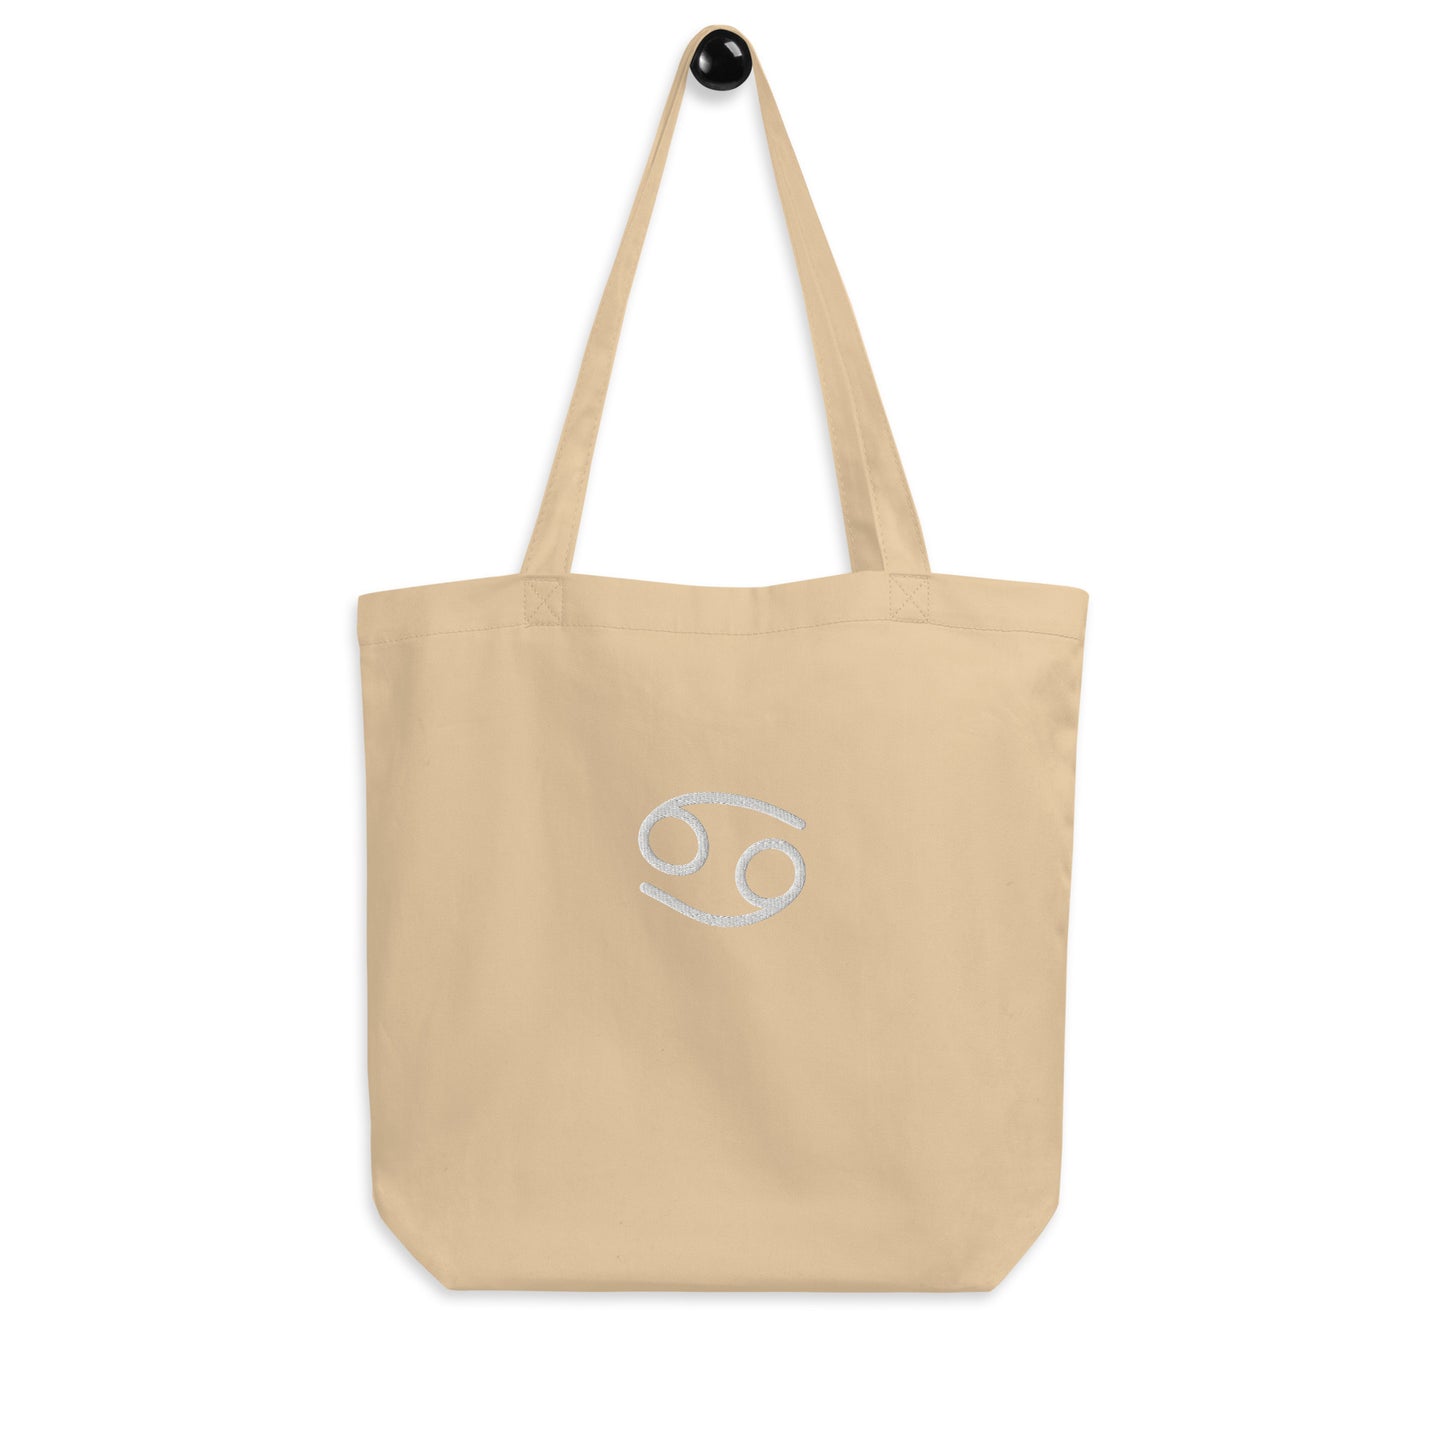 Cancer - Small Open Tote Bag - White Thread